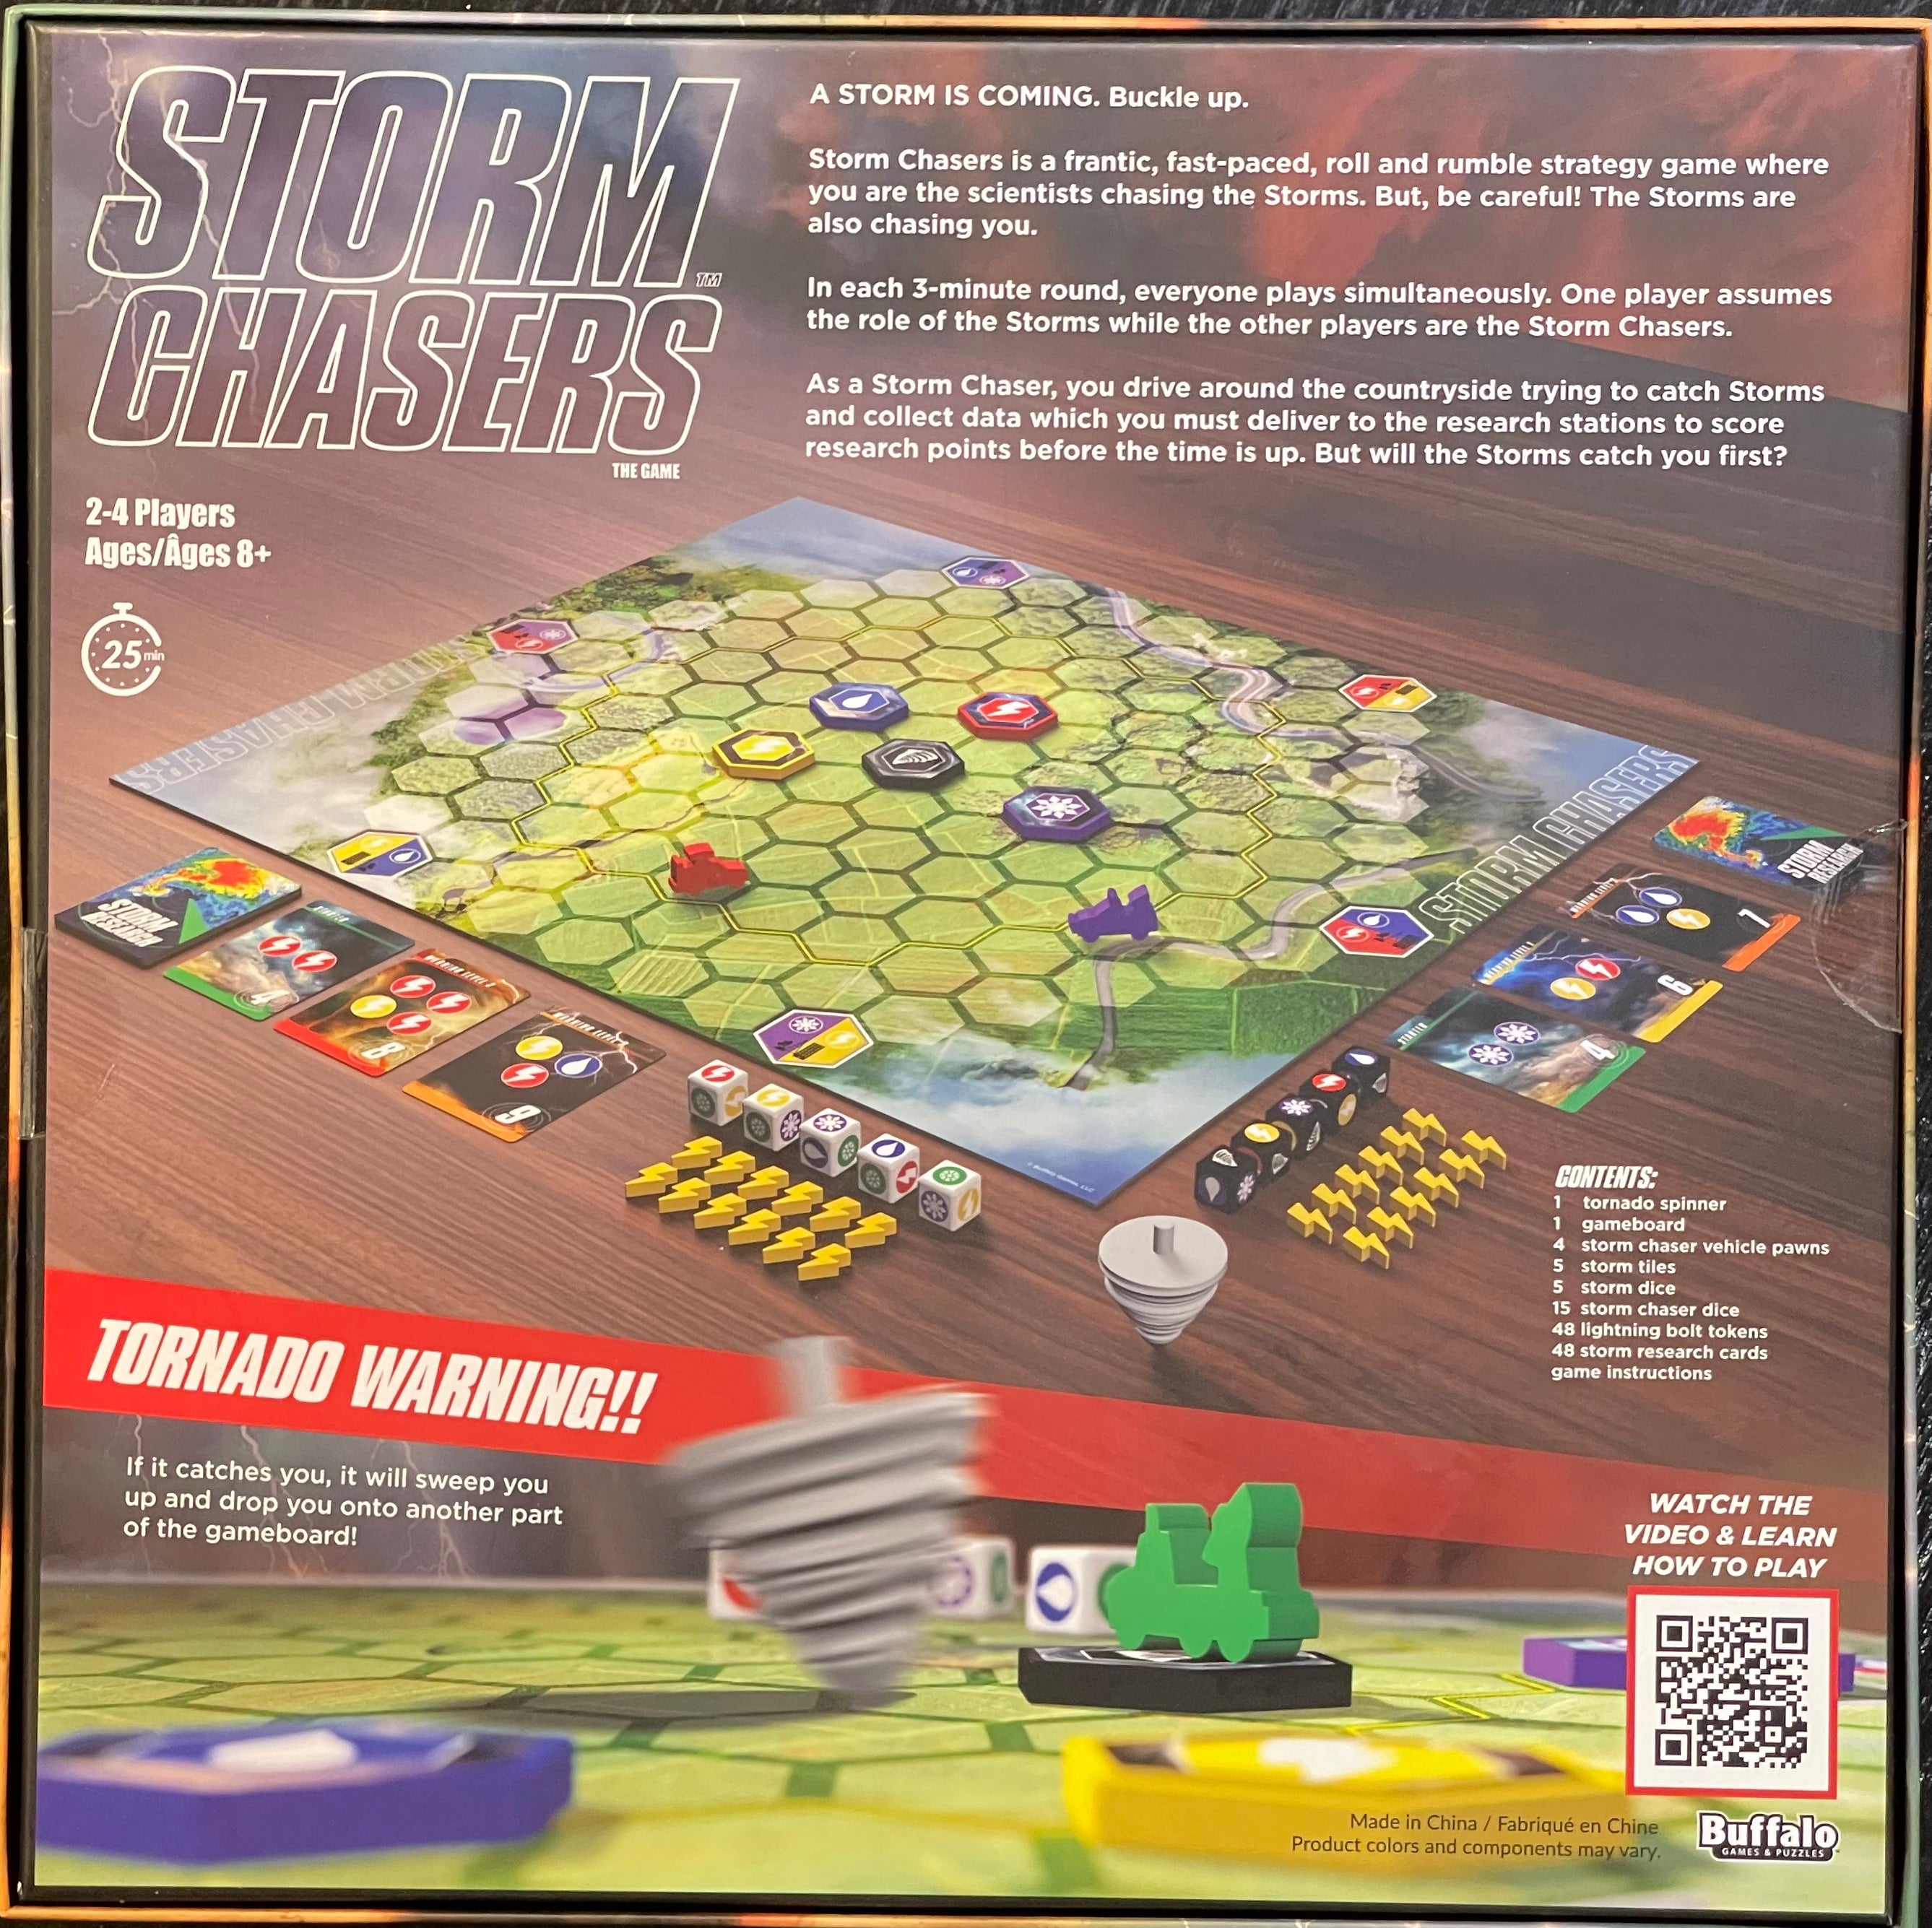 Rental - Storm Chasers - the Game